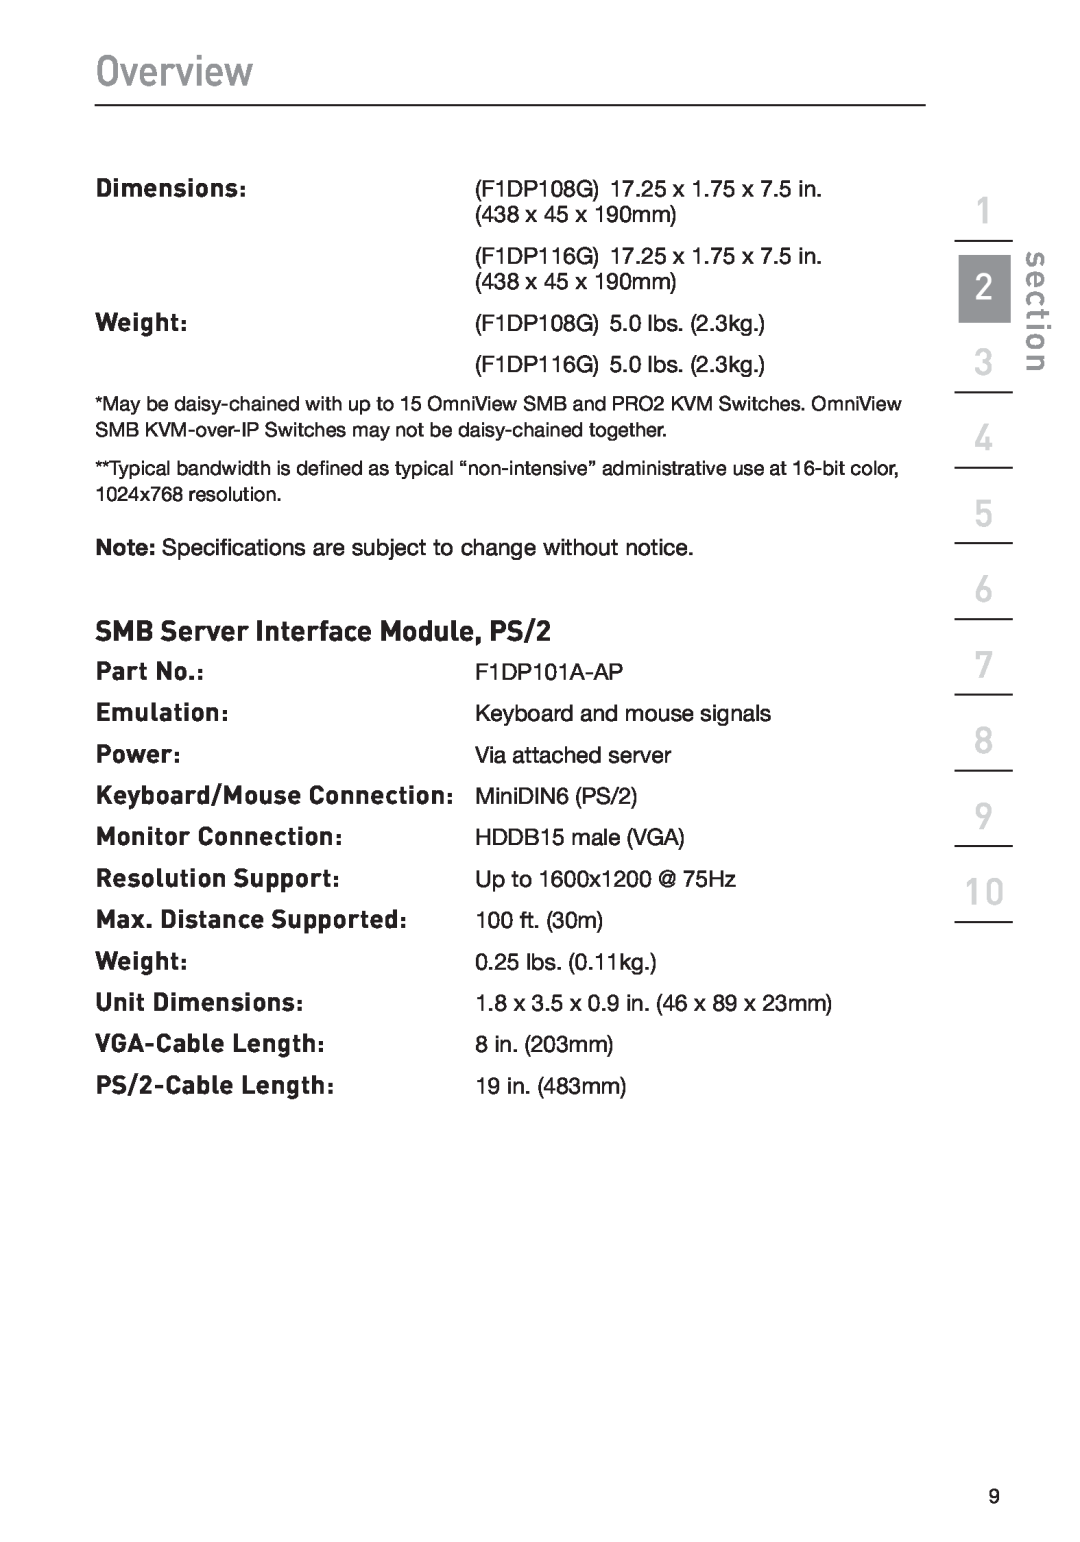 Belkin F1DP108G user manual SMB Server Interface Module, PS/2, Overview, section, 1.8 x 3.5 x 0.9 in. 46 x 89 x 23mm 